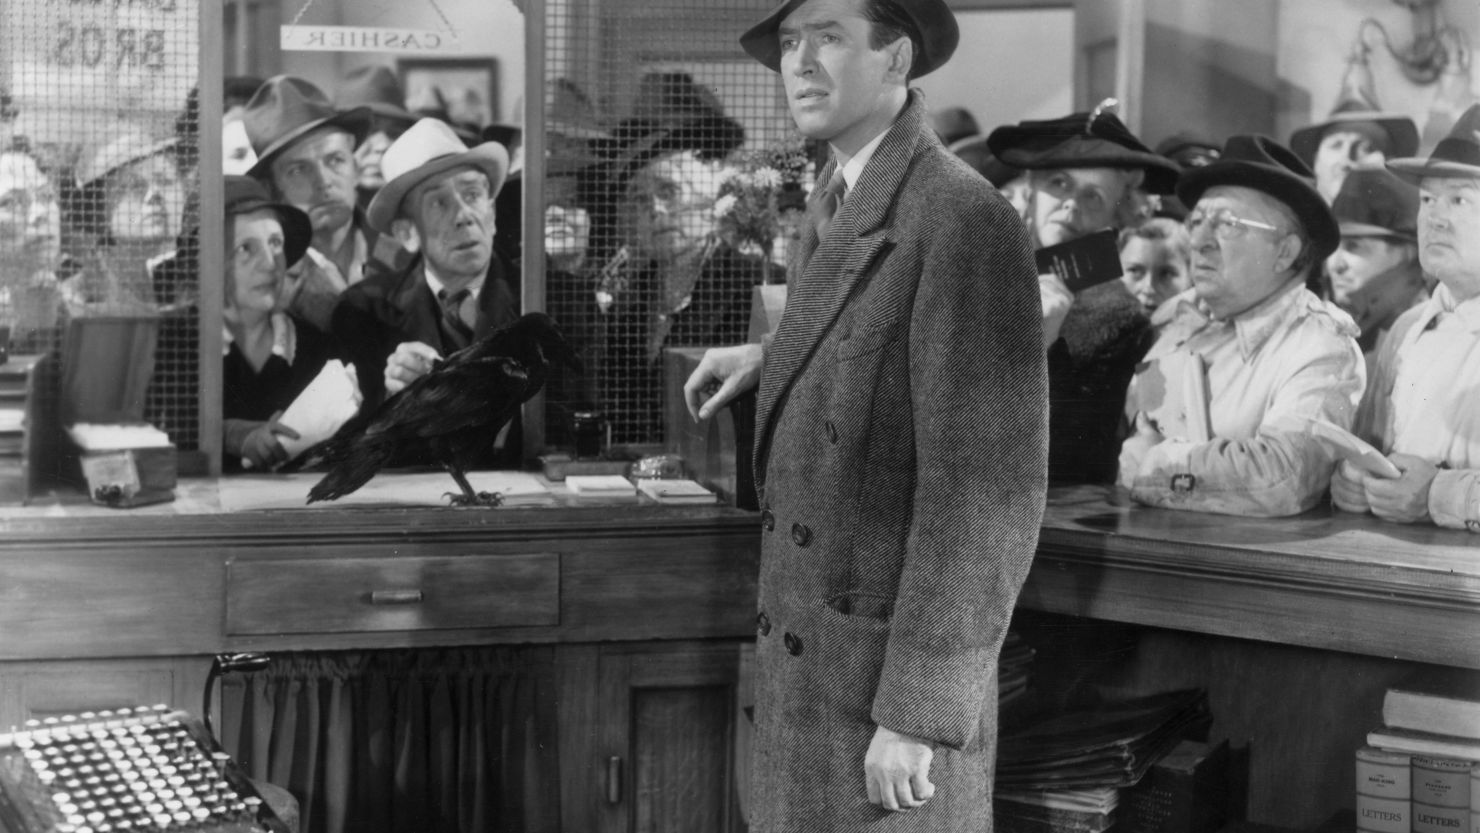 James Stewart is the reluctant Bedford Falls lifer, George Bailey, in "It's a Wonderful Life."